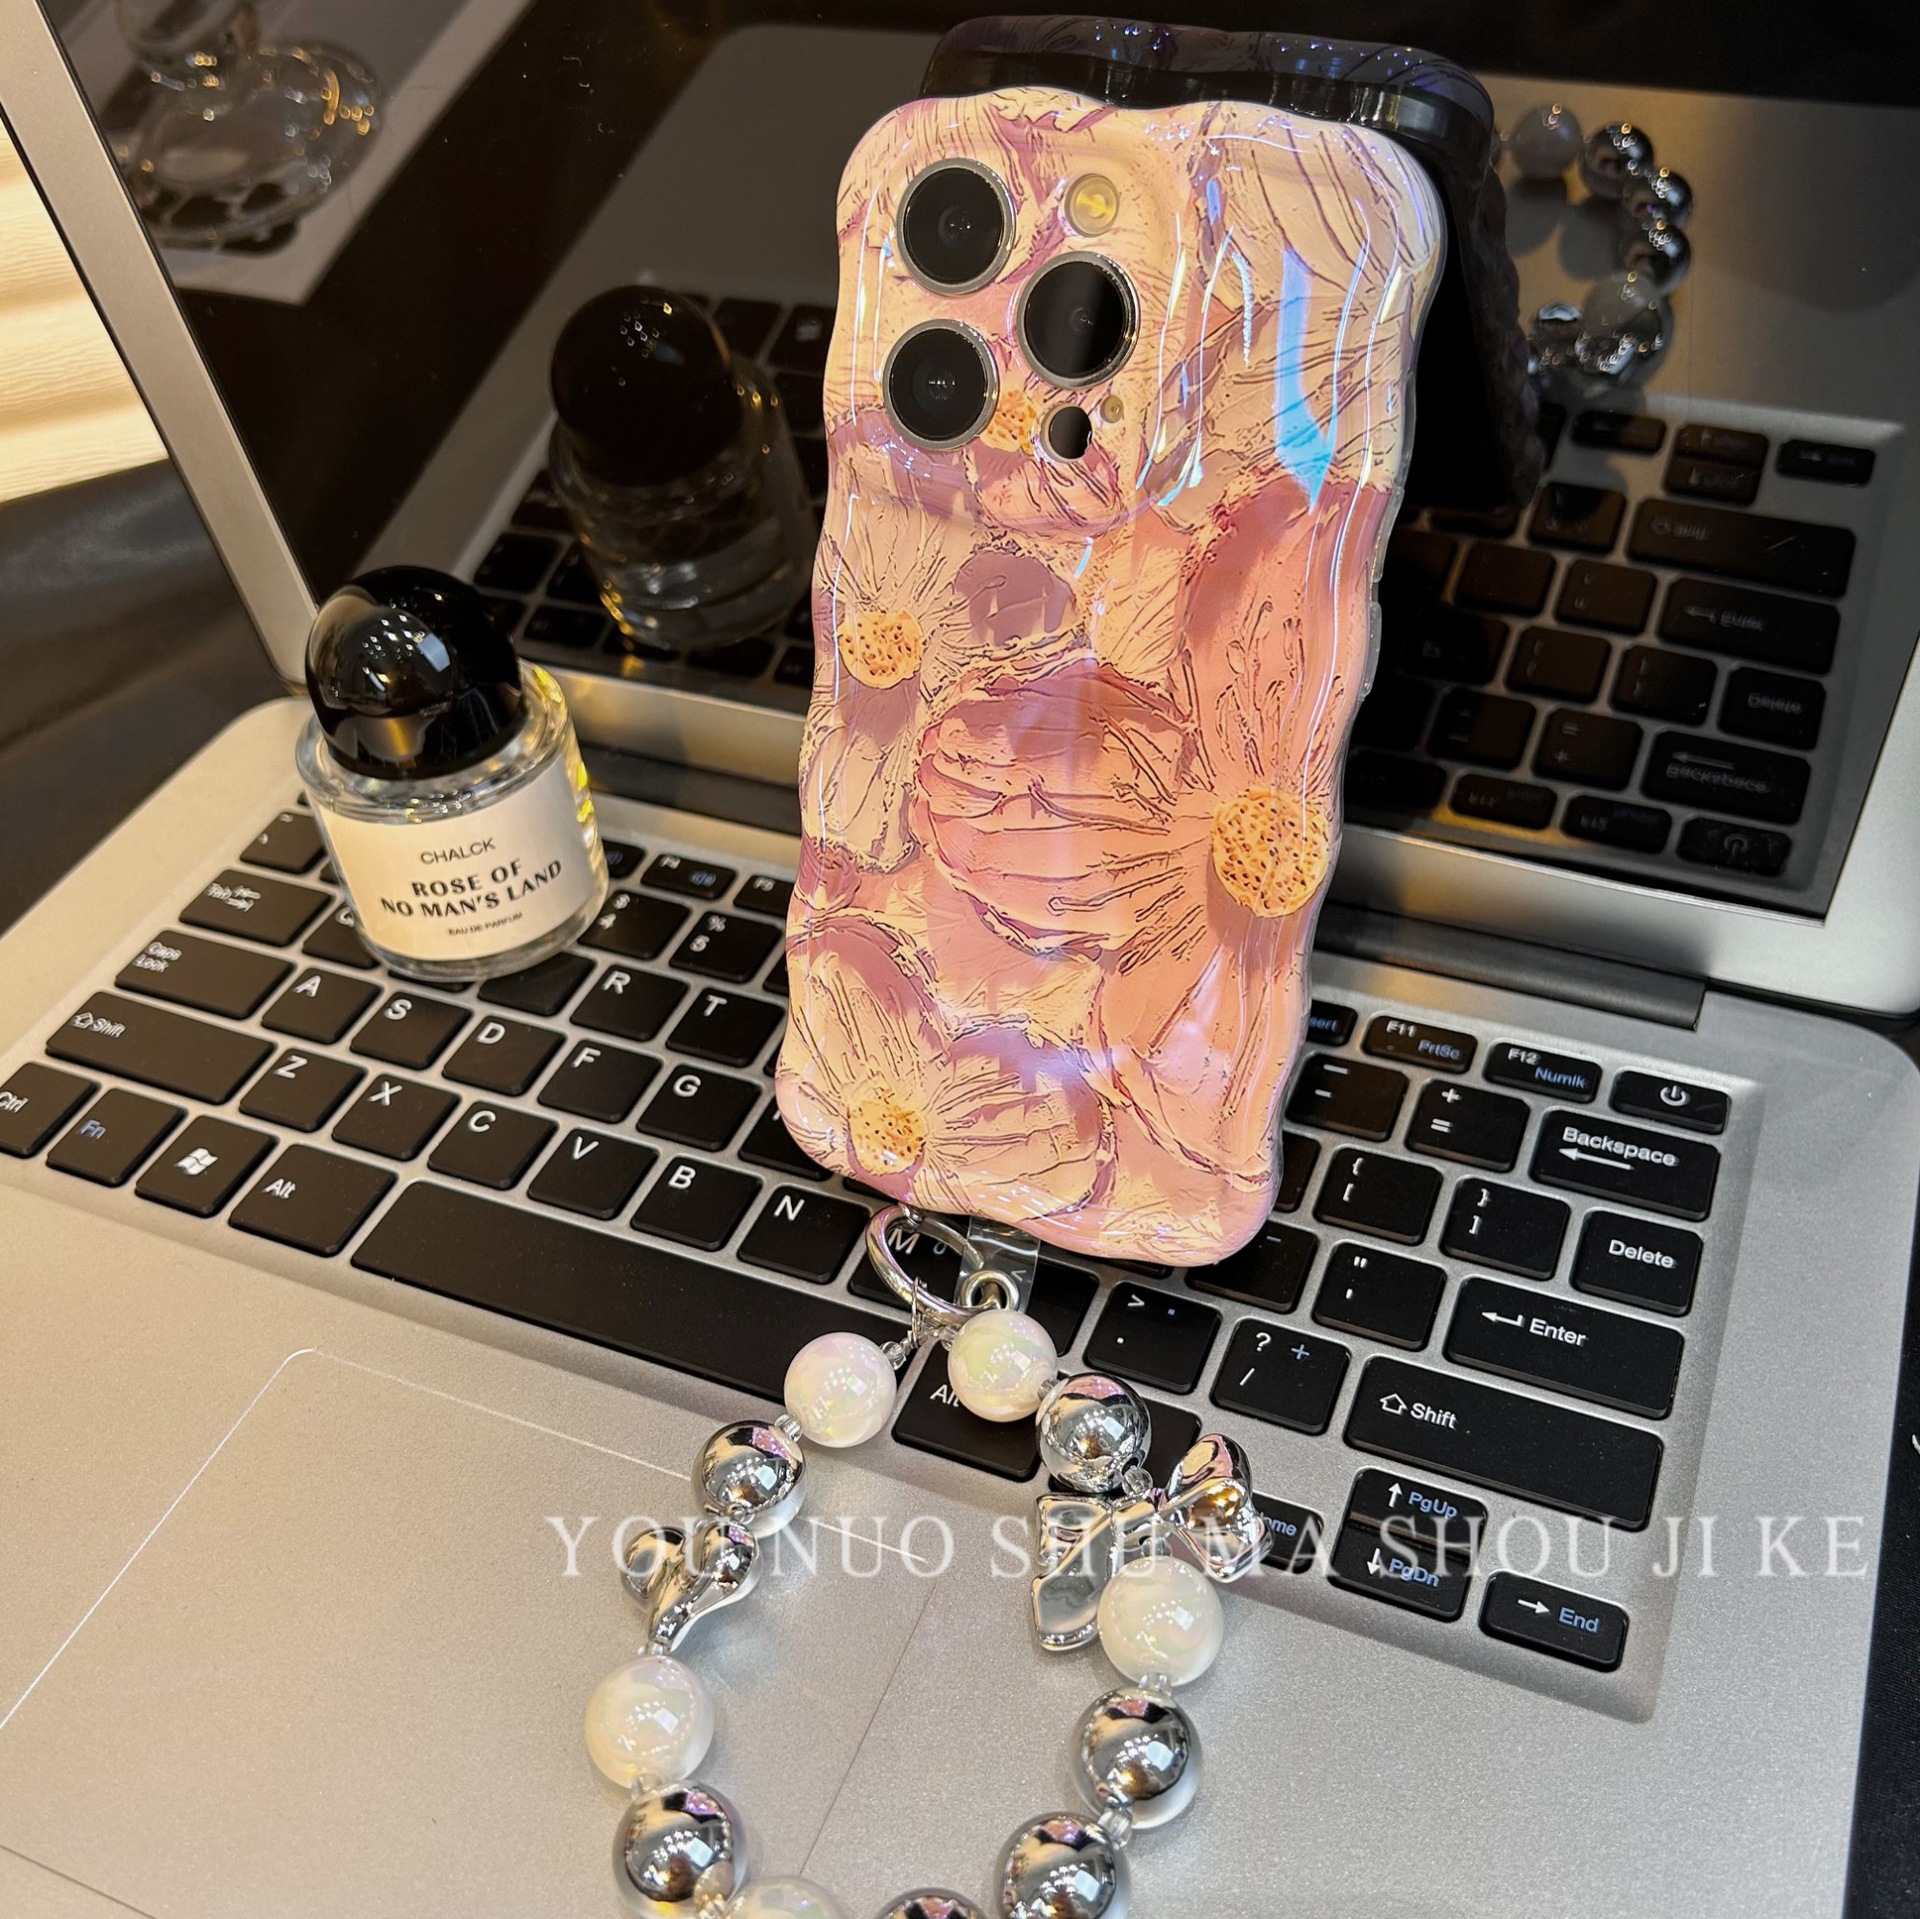 🔥New listing🔥 iPhone blue retro oil painting floral phone case